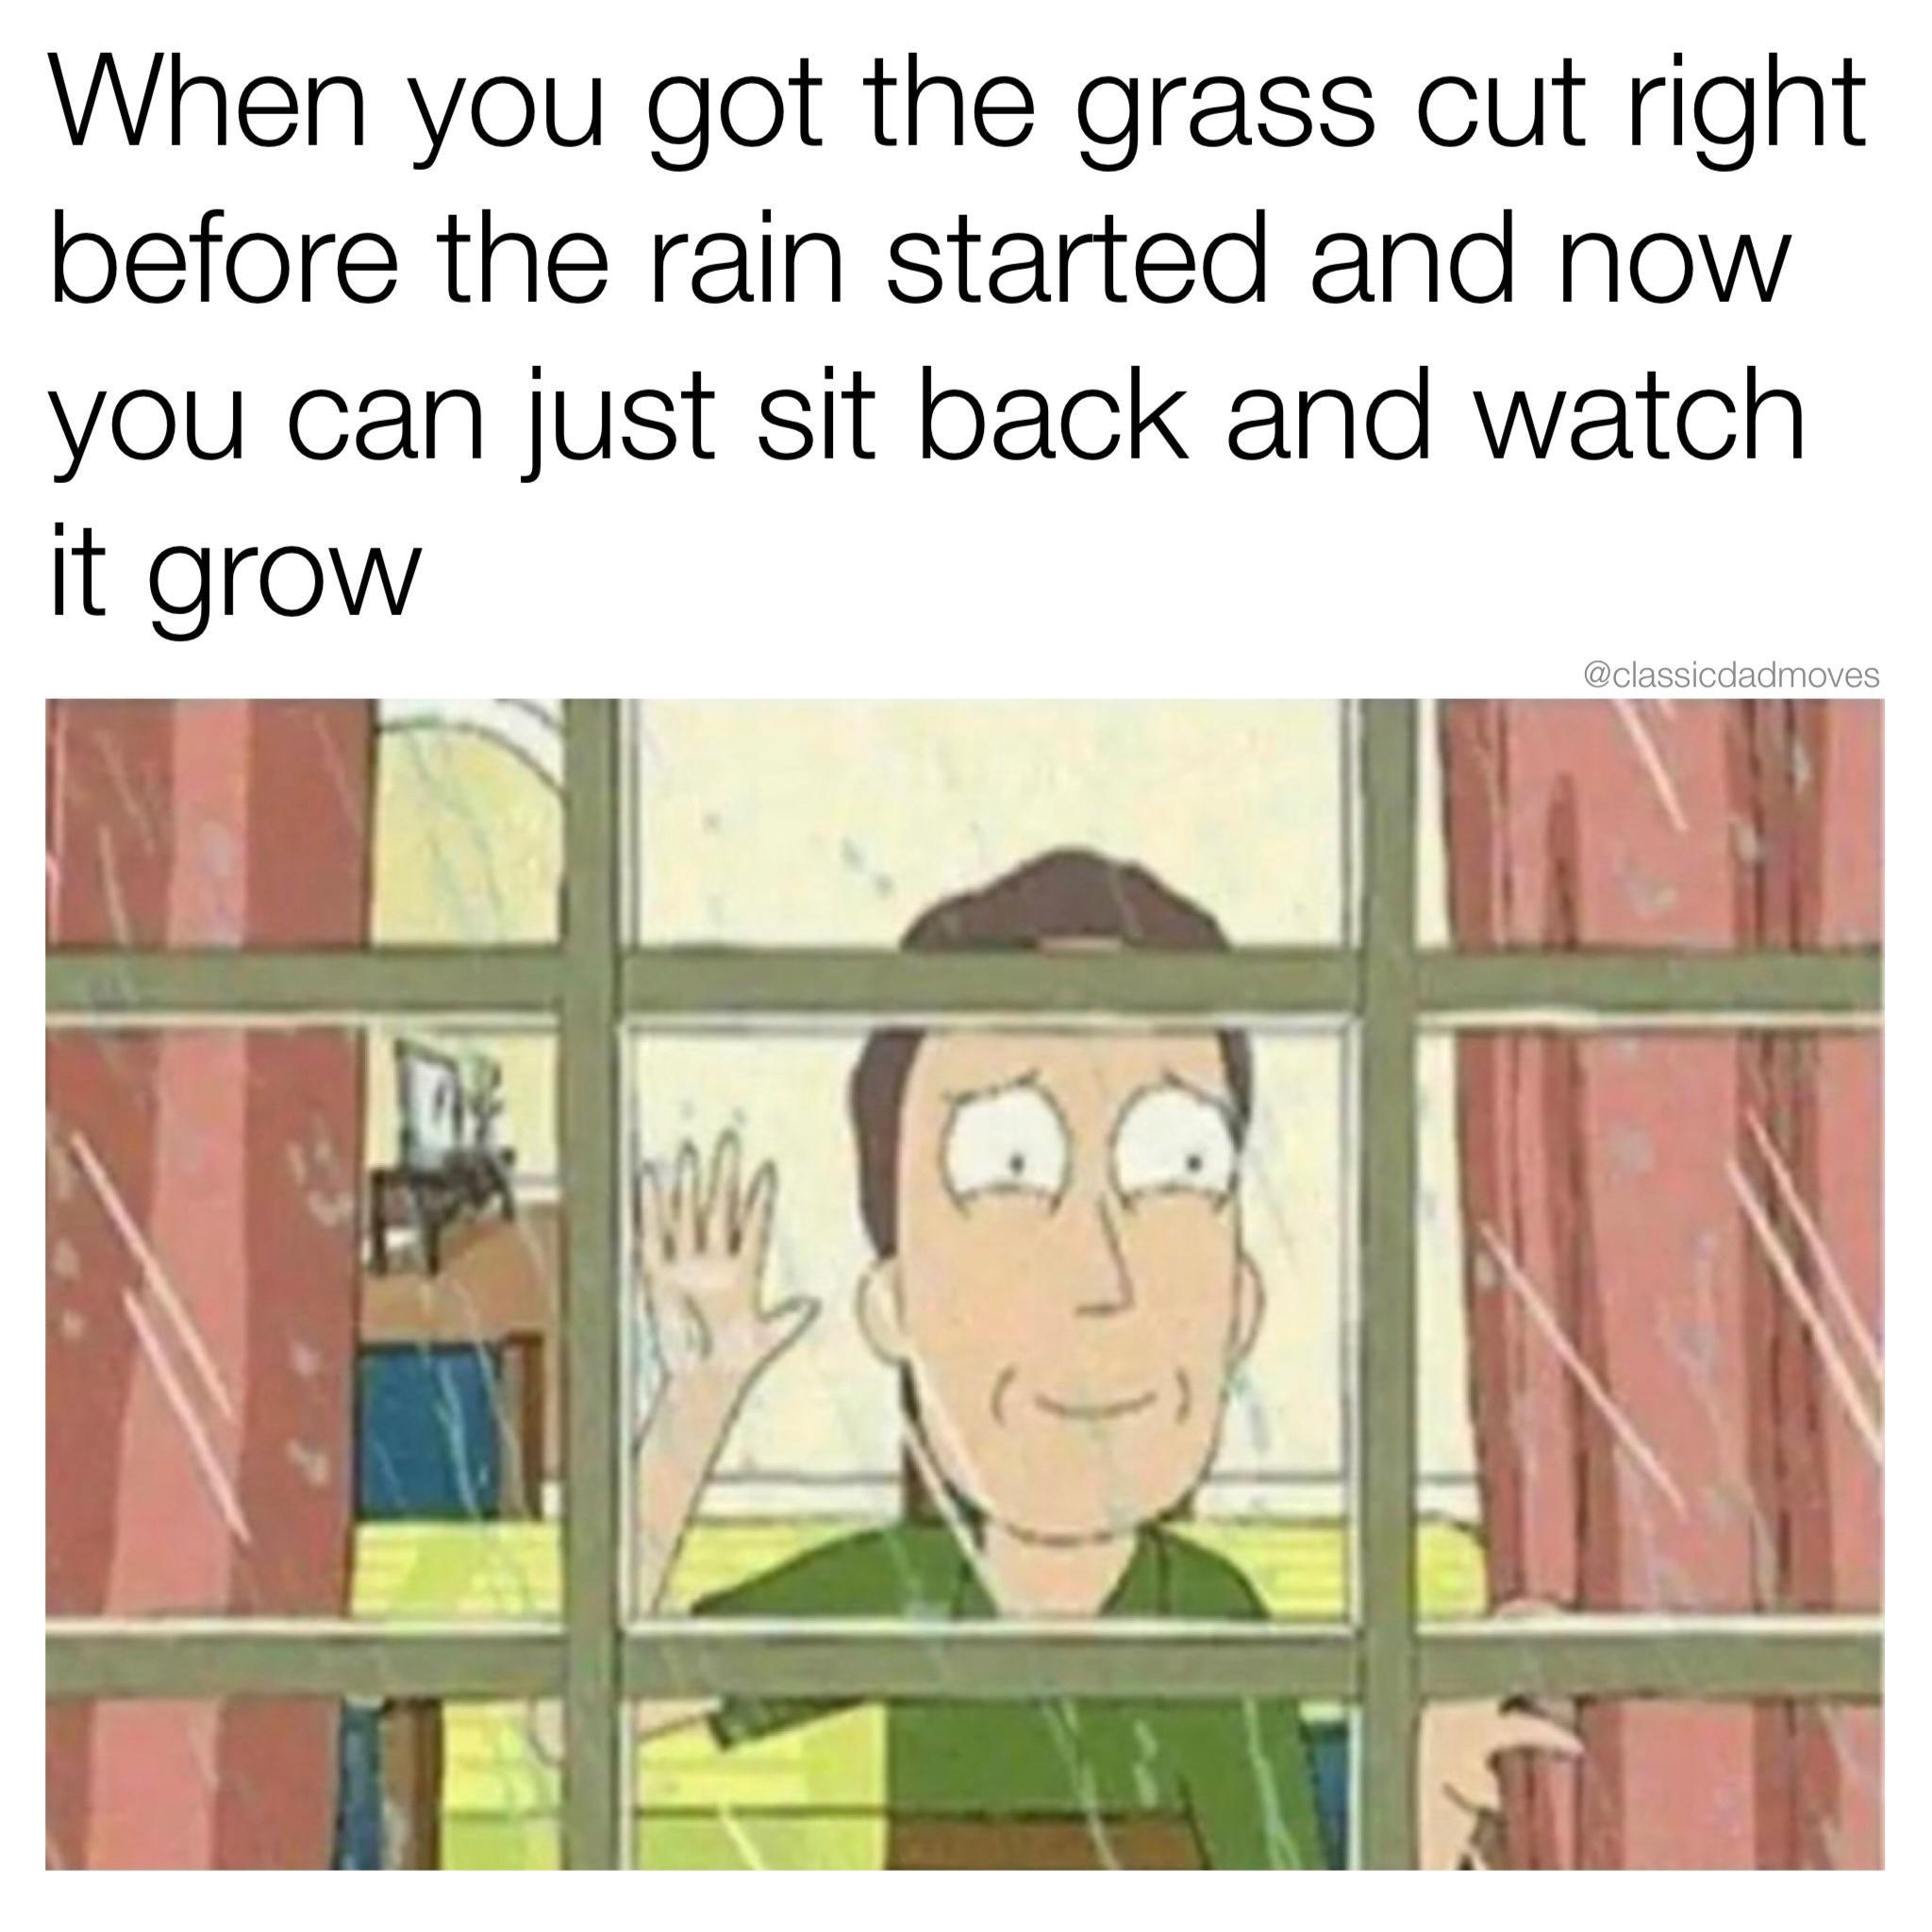 funny memes and pics - cartoon - When you got the grass cut right before the rain started and now you can just sit back and watch it grow The Im